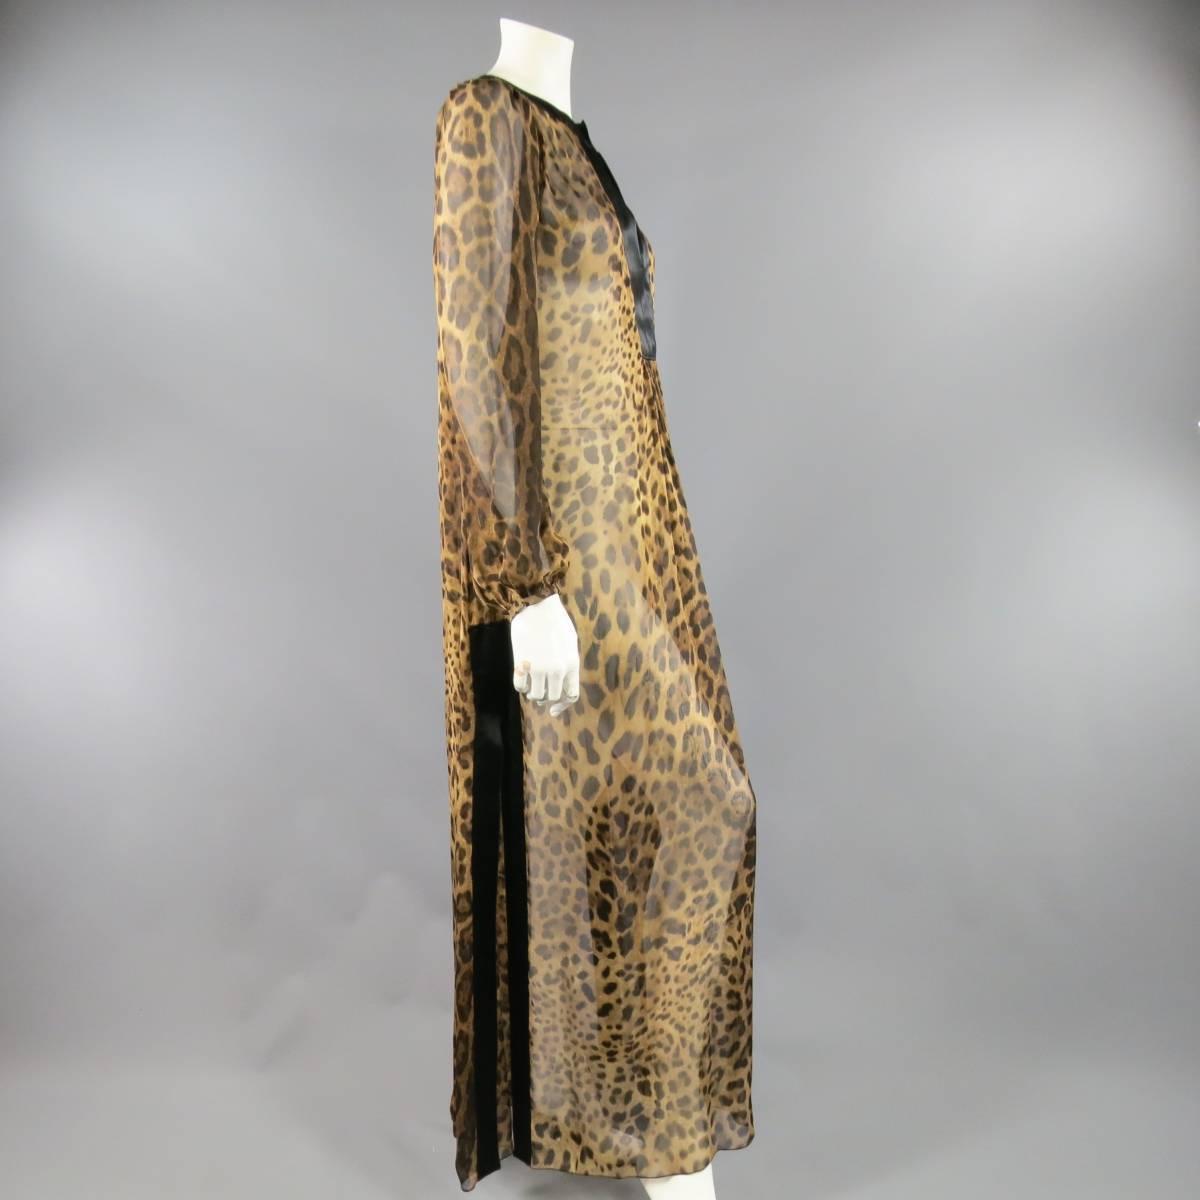 This gorgeous DOLCE & GABBANA maxi kaftan dress comes in flowing sheer leopard print chiffon with long puff sleeves, black chiffon trim, pleated front panel, and side slits. Missing tags. Made in Italy. Retails at $2350.00.
 
Excellent Pre-Owned